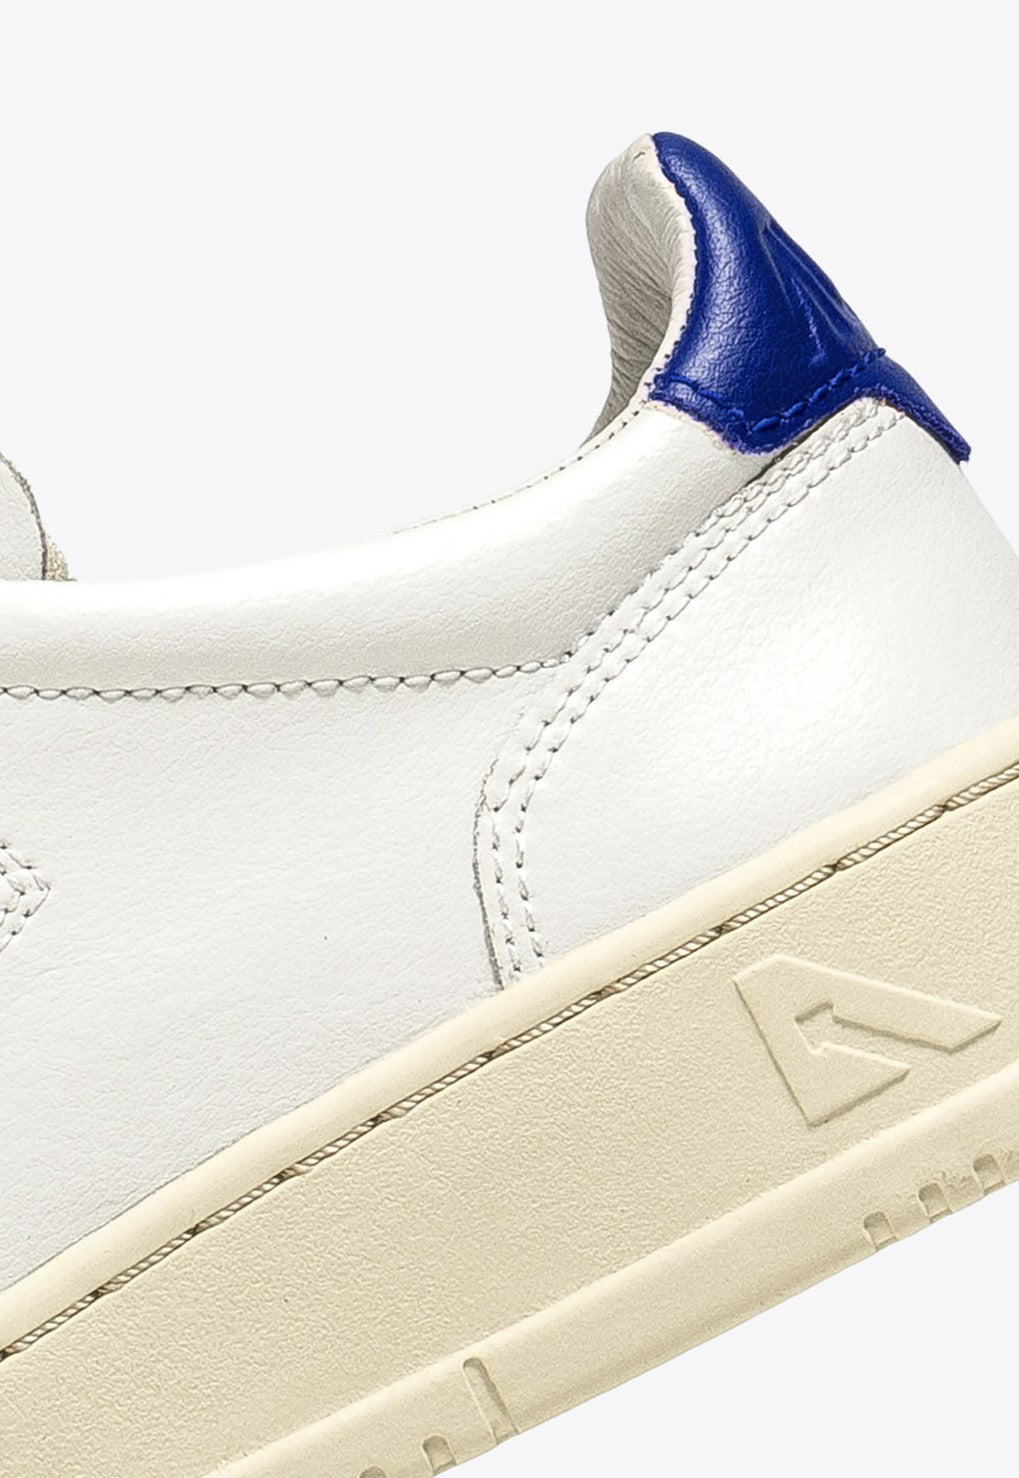 alt-image__White-leather-sneaker-with-blue-back-tab---Medalist